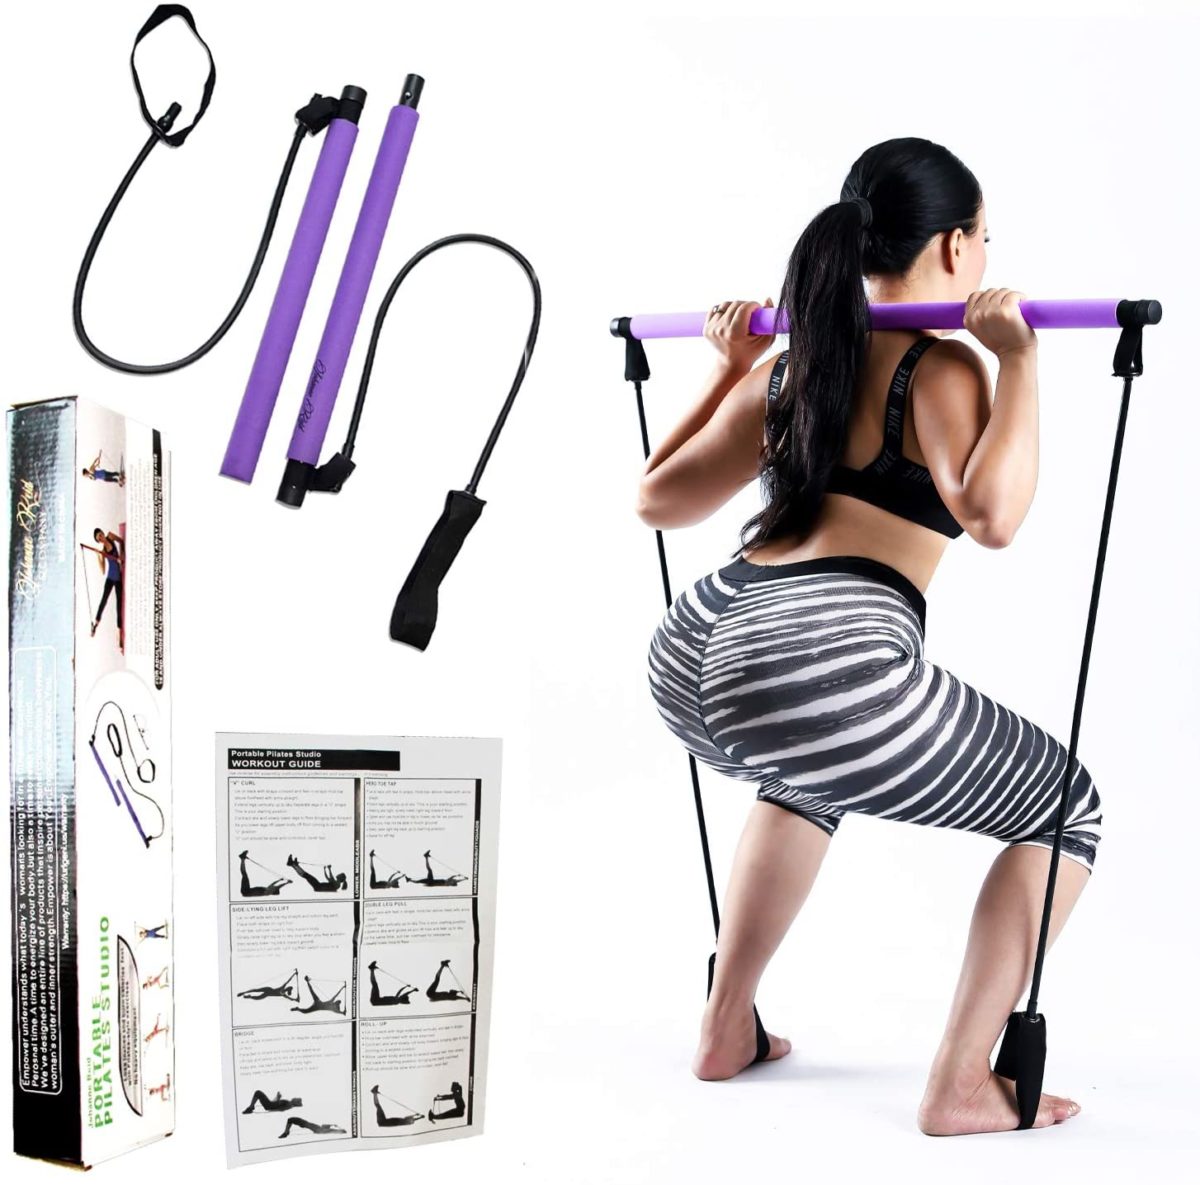 31 of best pieces of workout equipment you can buy on amazon for your home gym | with that said, here are 31 pieces of workout equipment you can buy on amazon.